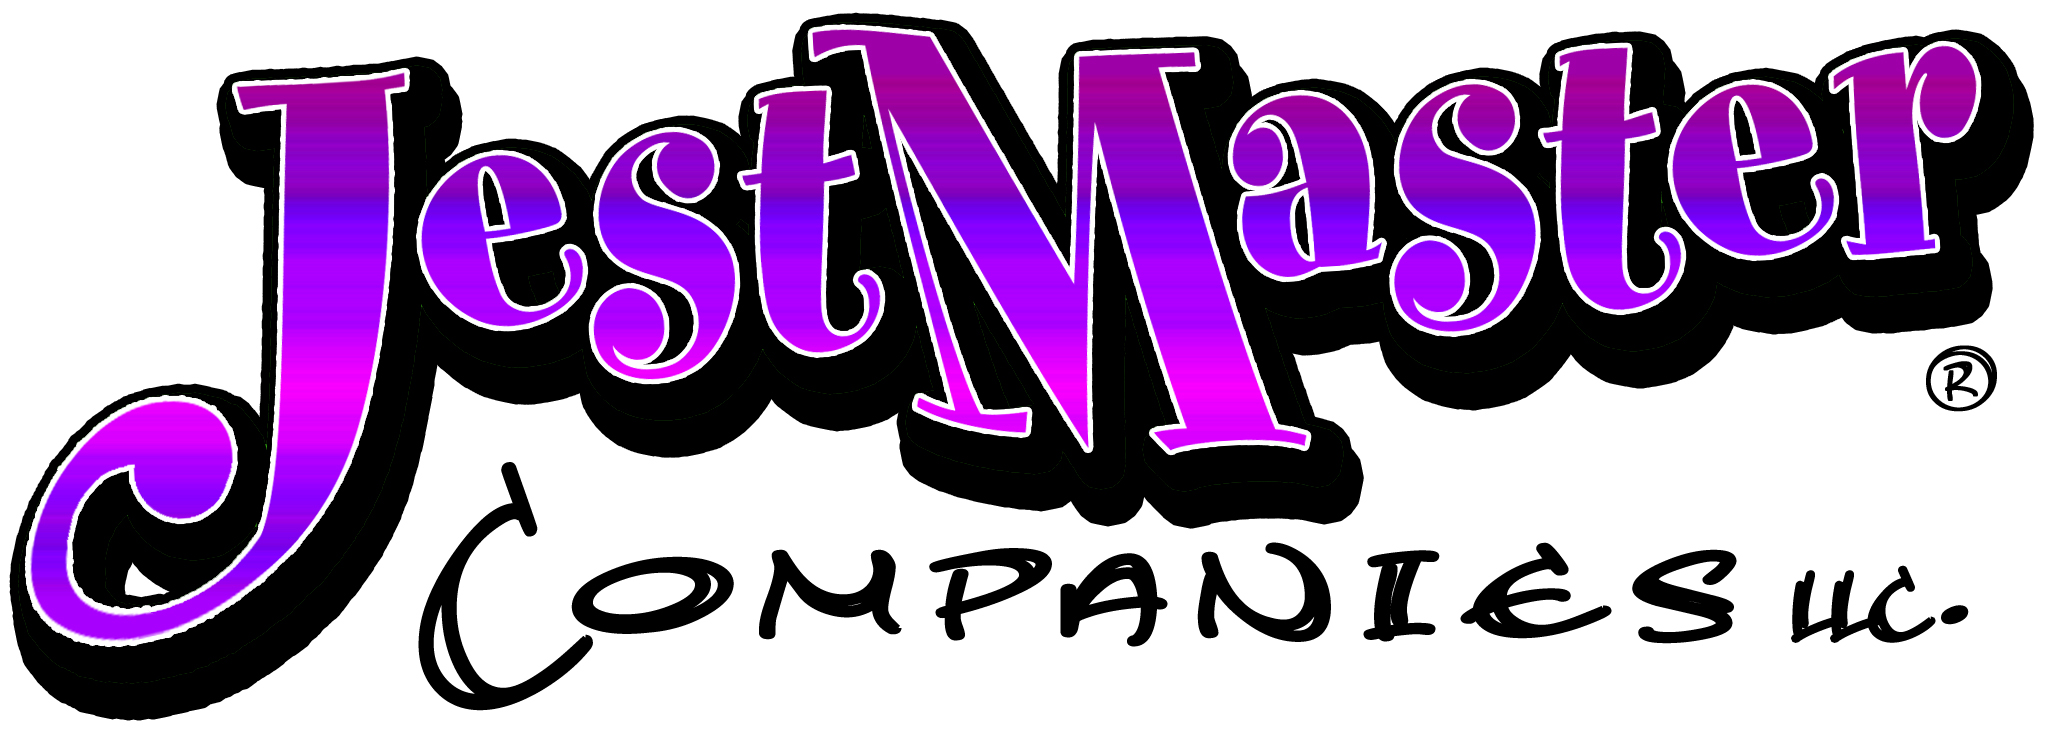 Jestmaster%20Companies%20LOGO%20color%20MASTER%202021